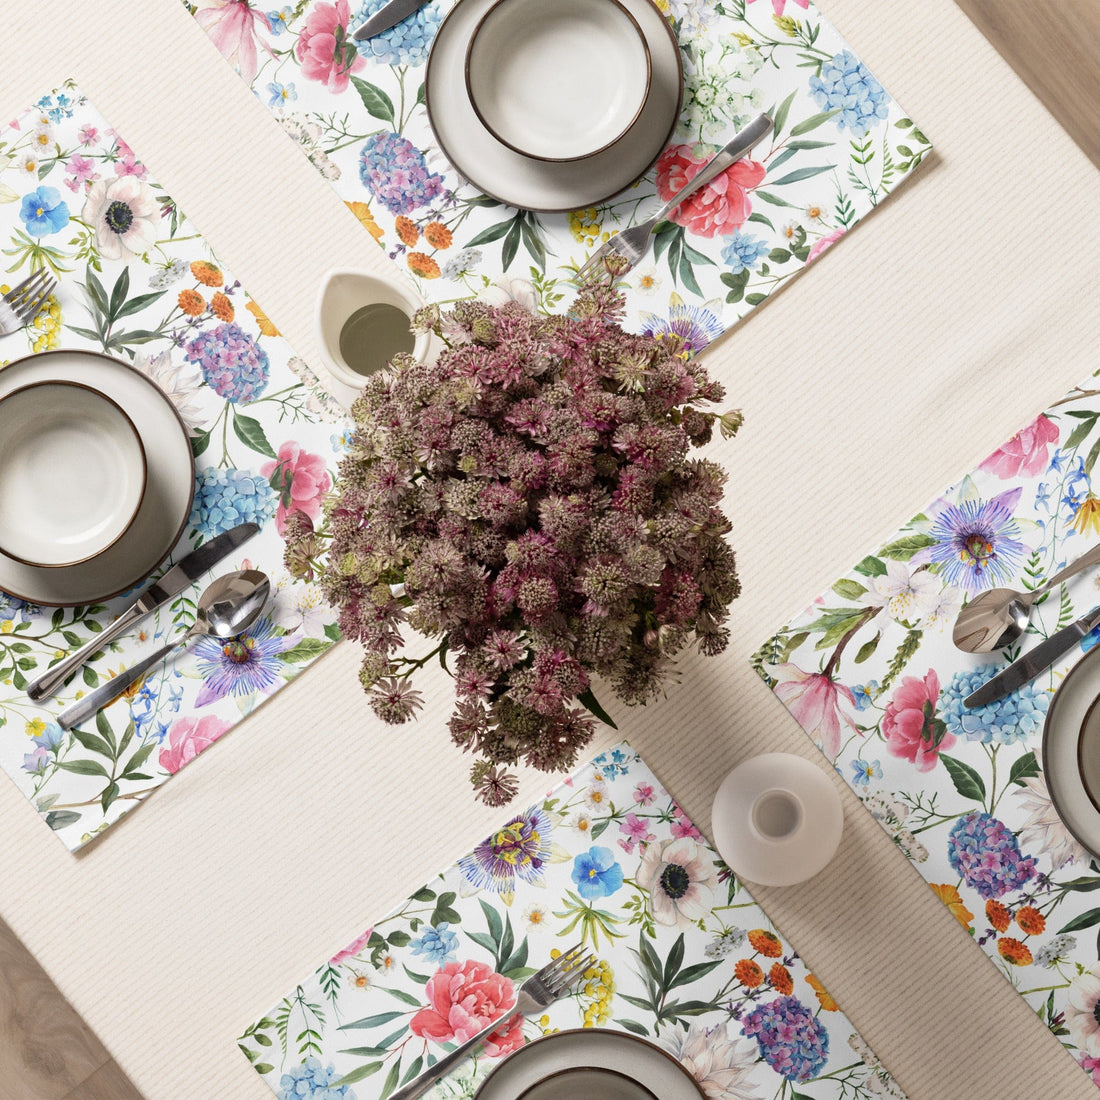 Kate McEnroe New York Watercolor Spring Floral Bloom 4 - Piece Placemat SetPlacemats3703010_17484